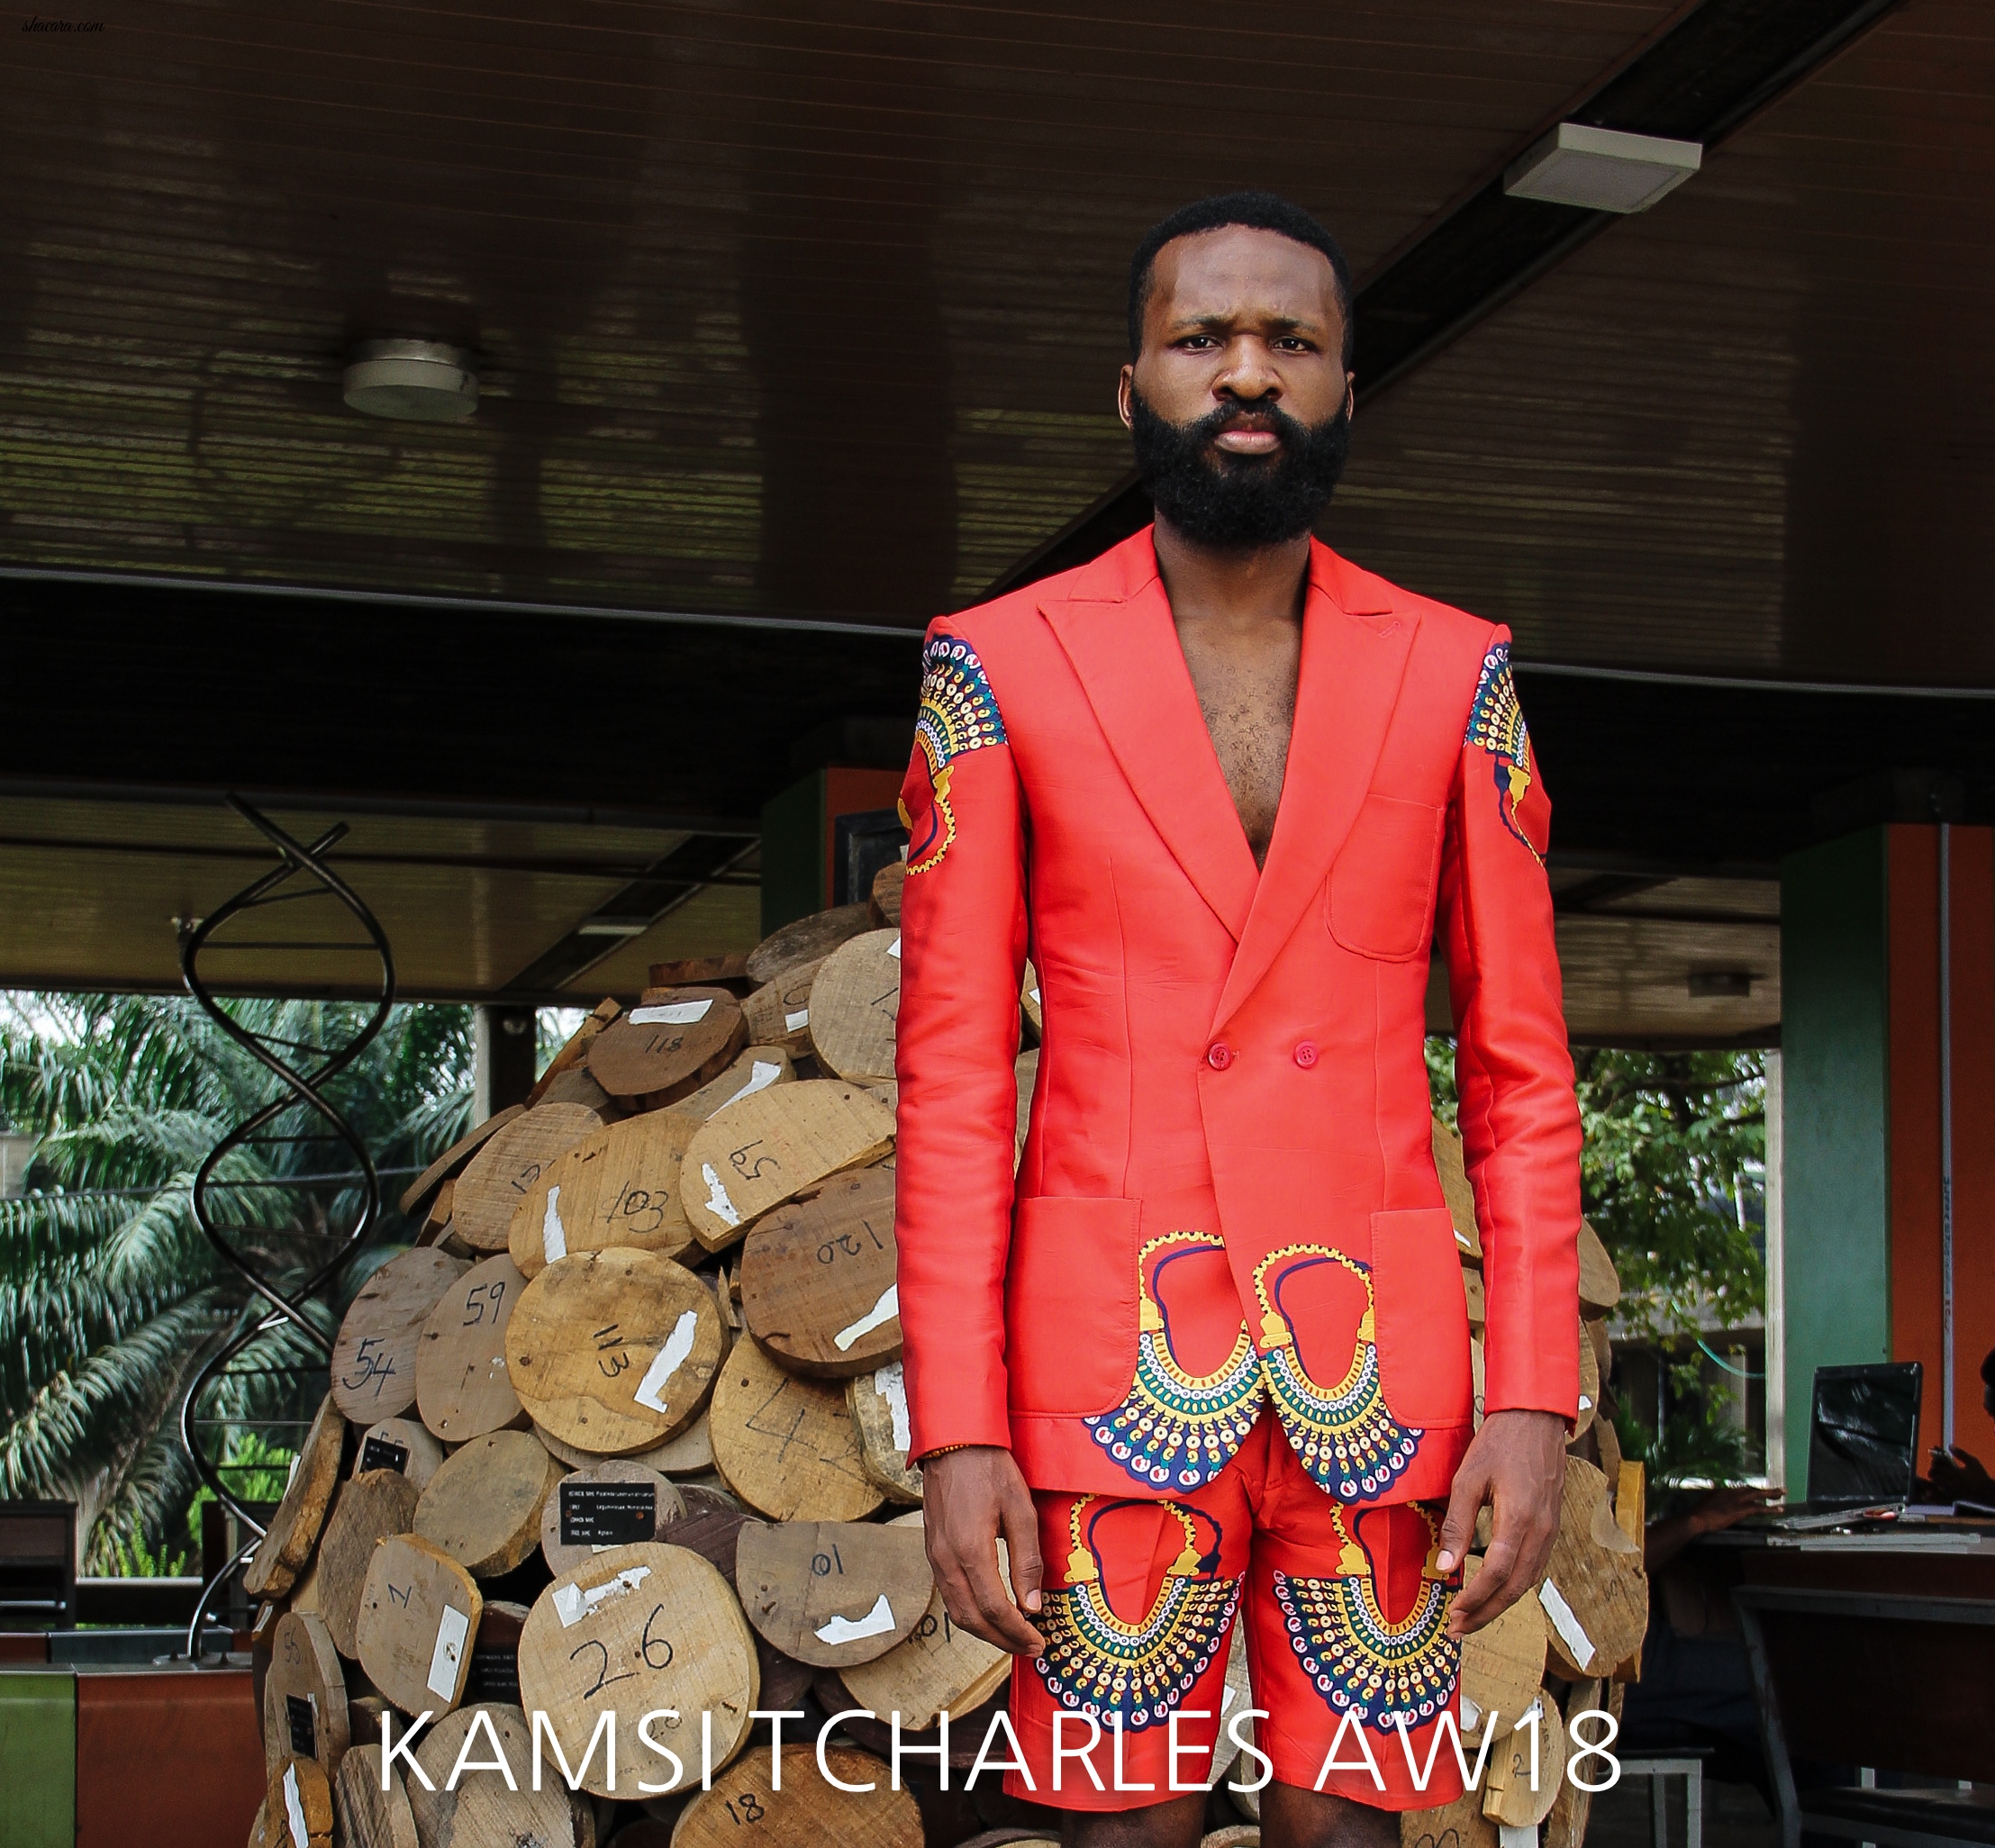 The Chronicles! Kamsi Tcharles’ Autumn Winter 18 Is Royal & Powerful